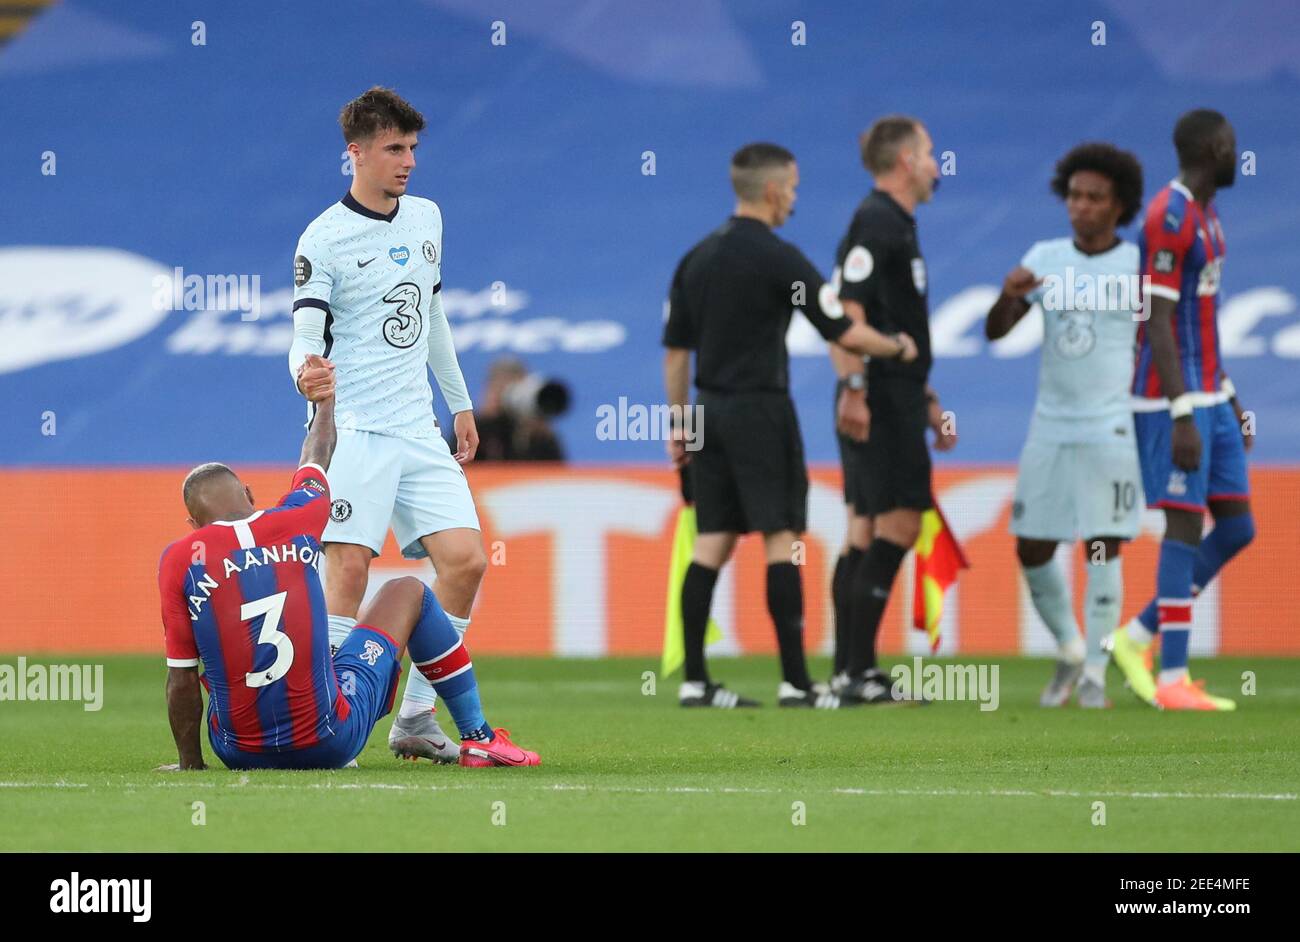 Soccer Football - Premier League - Crystal Palace v Chelsea - Selhurst Park, London, Britain - July 7, 2020  Chelsea's Mason Mount with Crystal Palace's Patrick van Aanholt after the match, as play resumes behind closed doors following the outbreak of the coronavirus disease (COVID-19)  REUTERS / Peter Cziborra / Pool  EDITORIAL USE ONLY. No use with unauthorized audio, video, data, fixture lists, club/league logos or 'live' services. Online in-match use limited to 75 images, no video emulation. No use in betting, games or single club/league/player publications.  Please contact your account re Stock Photo